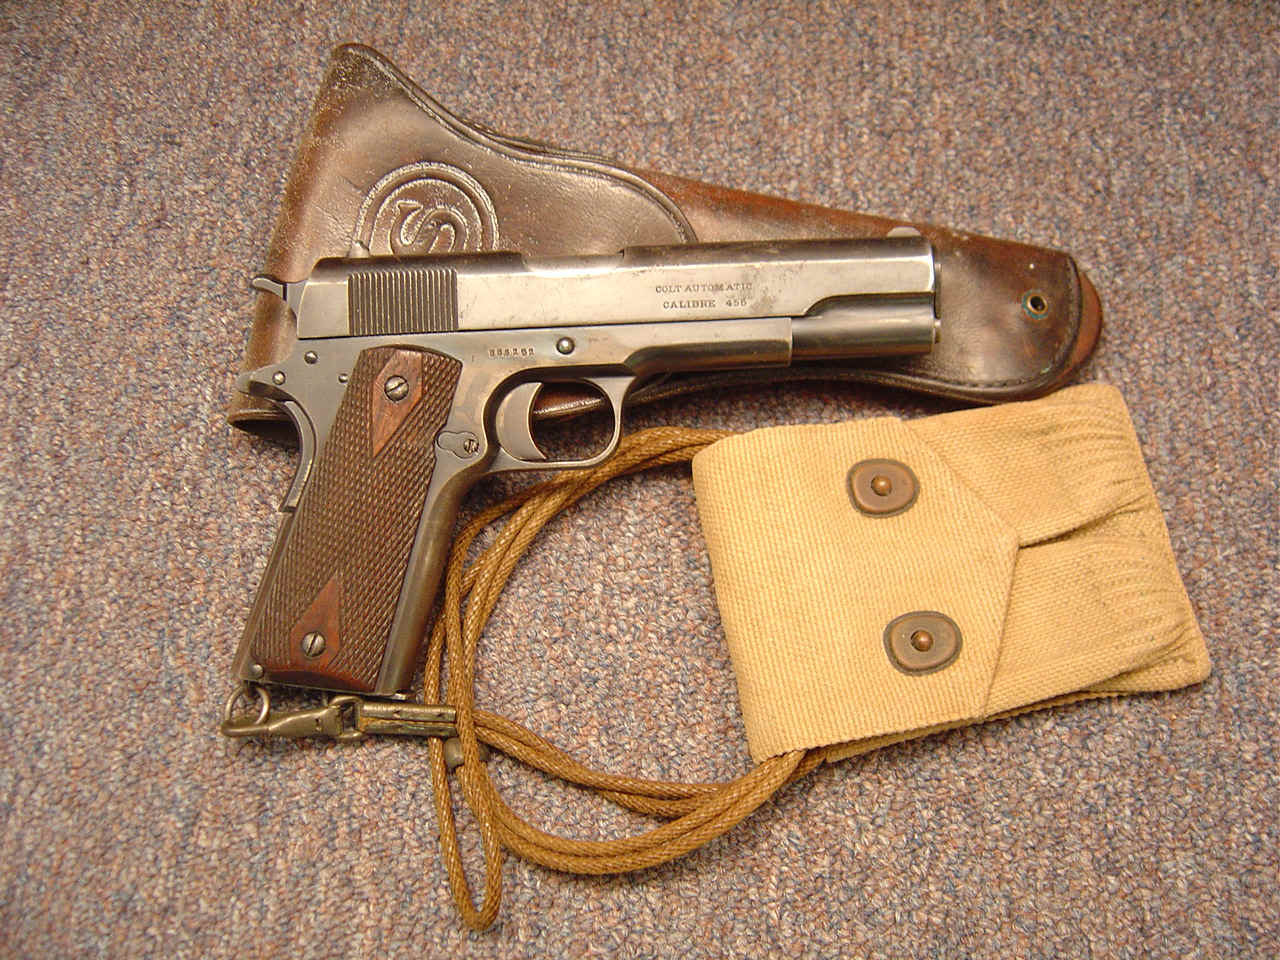 *Colt Model 1911 Semi-Auto Pistol, RAF Variation, with  Lanyard and Leather Service Holster and Canvas Magazine Pouch